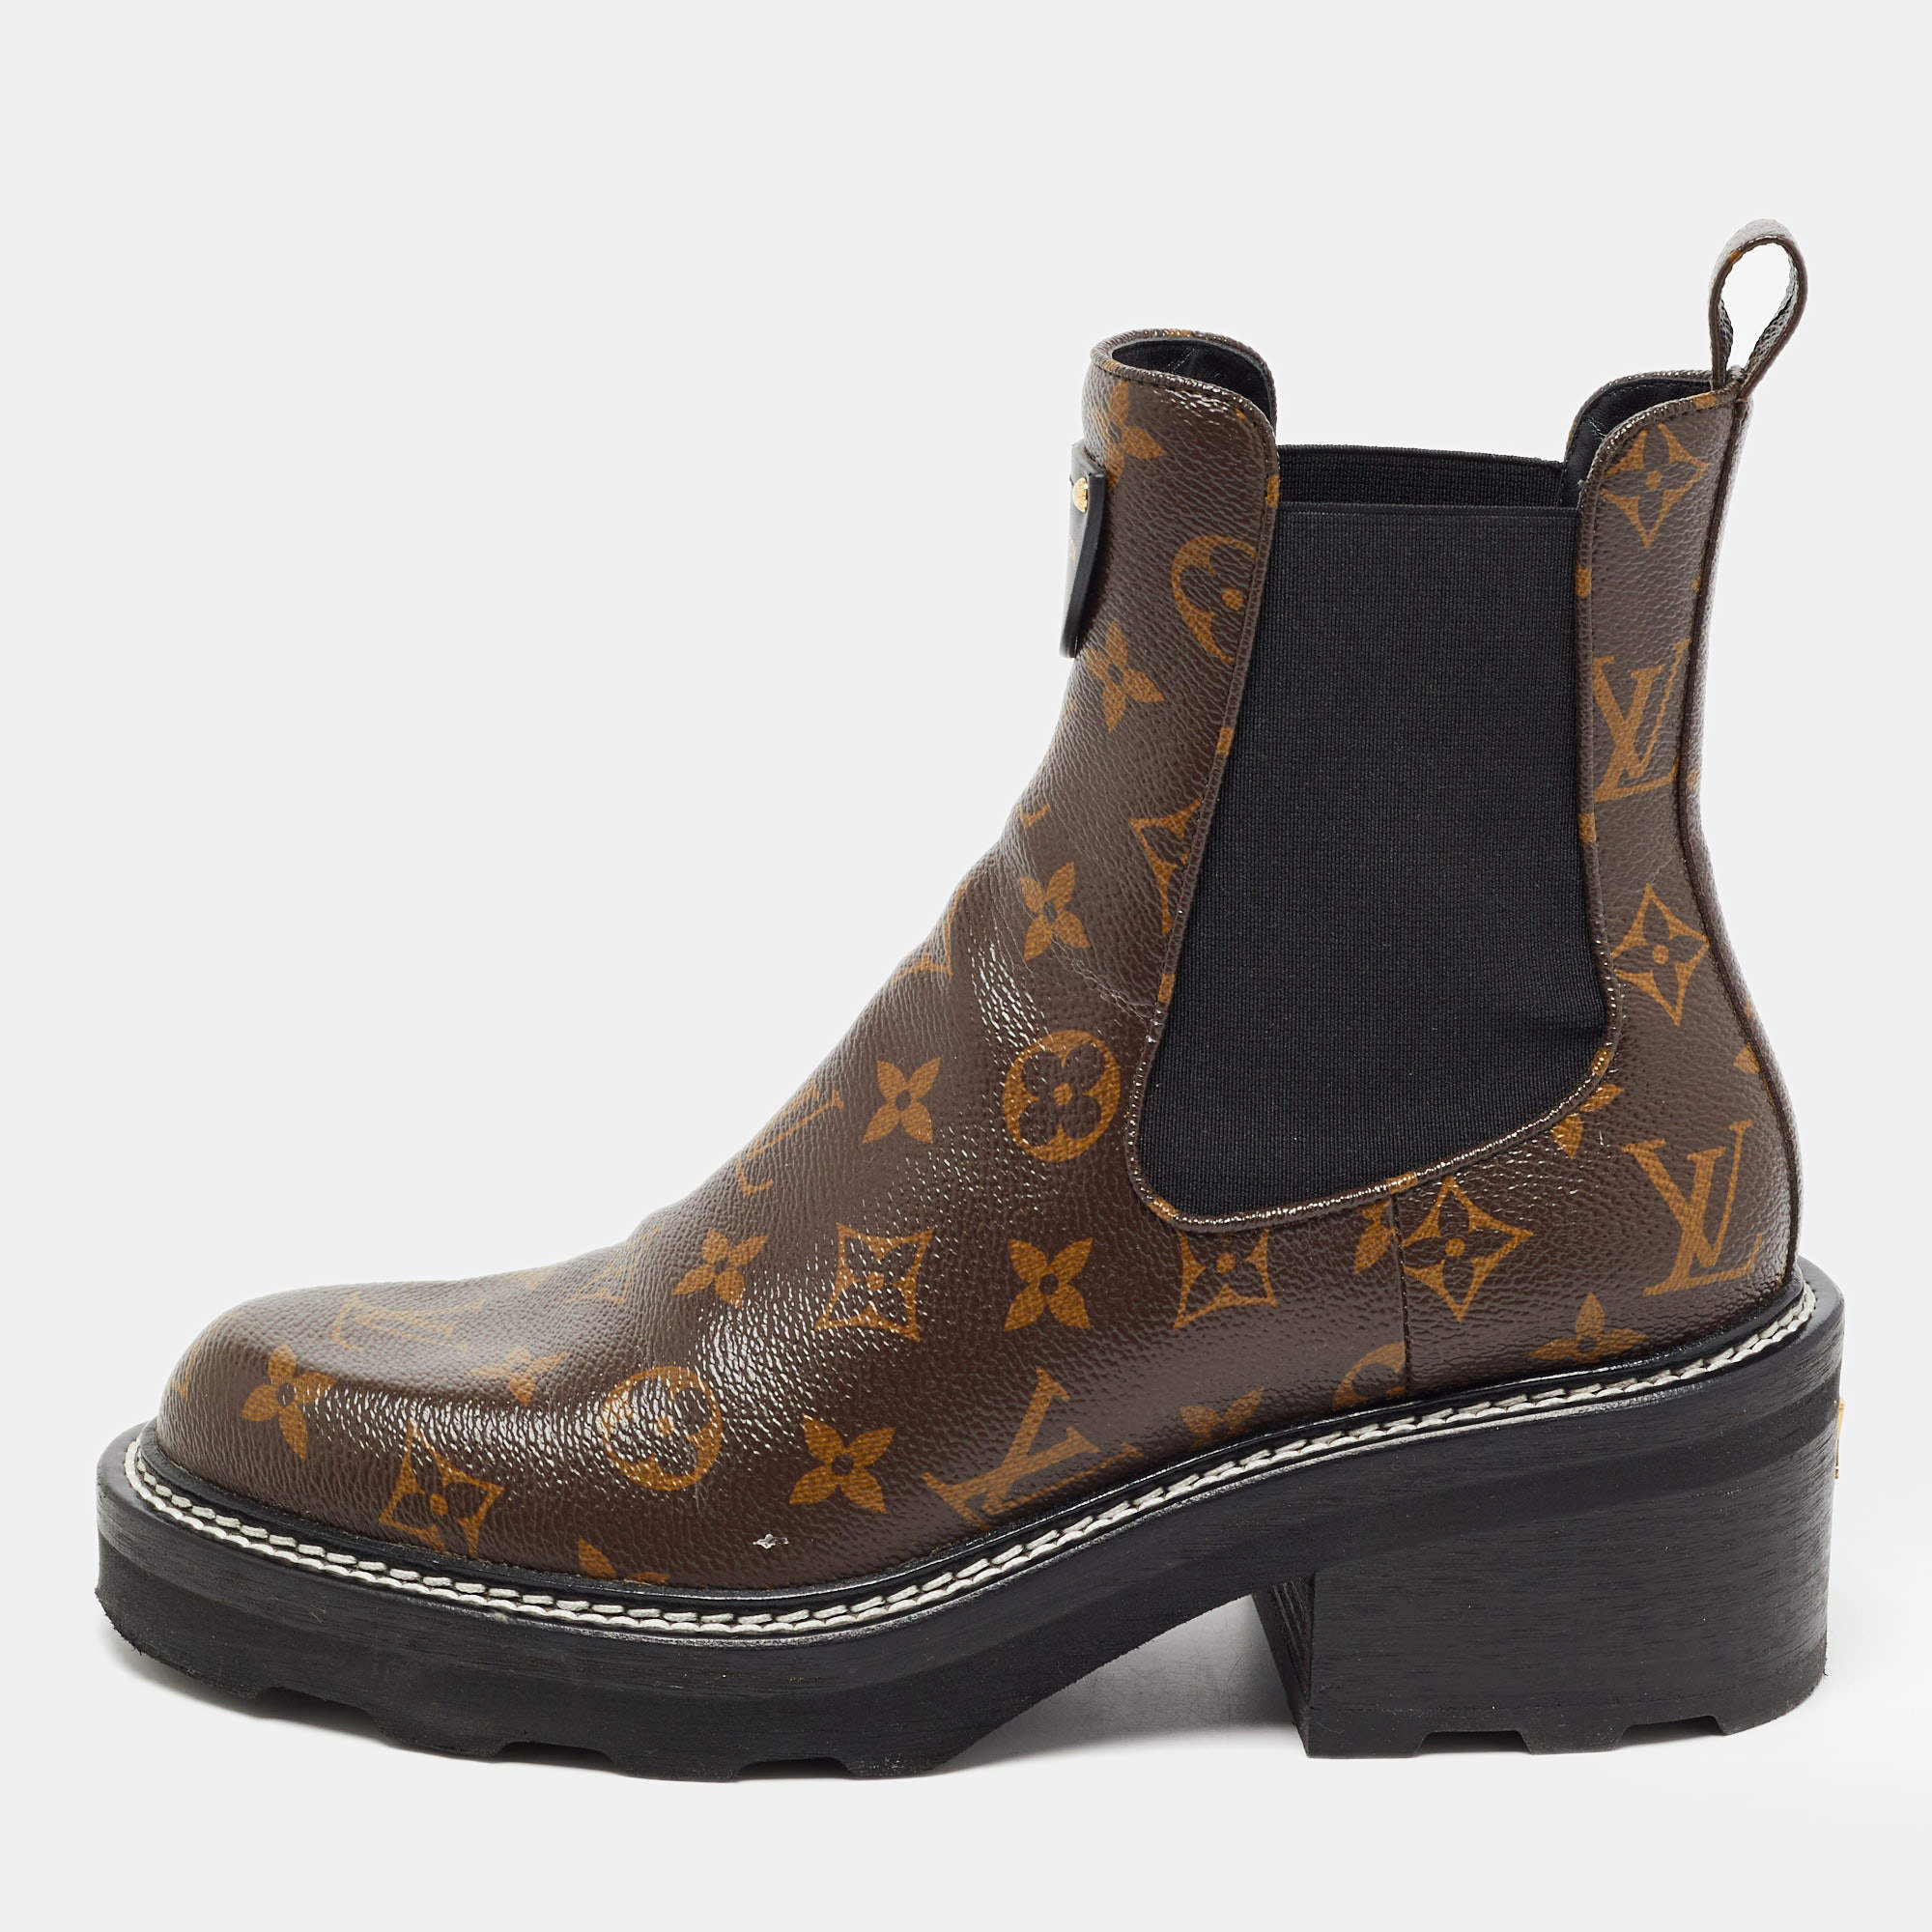 Louis Vuitton Monogram LV Beaubourg Ankle Boots, Brown, 36.5